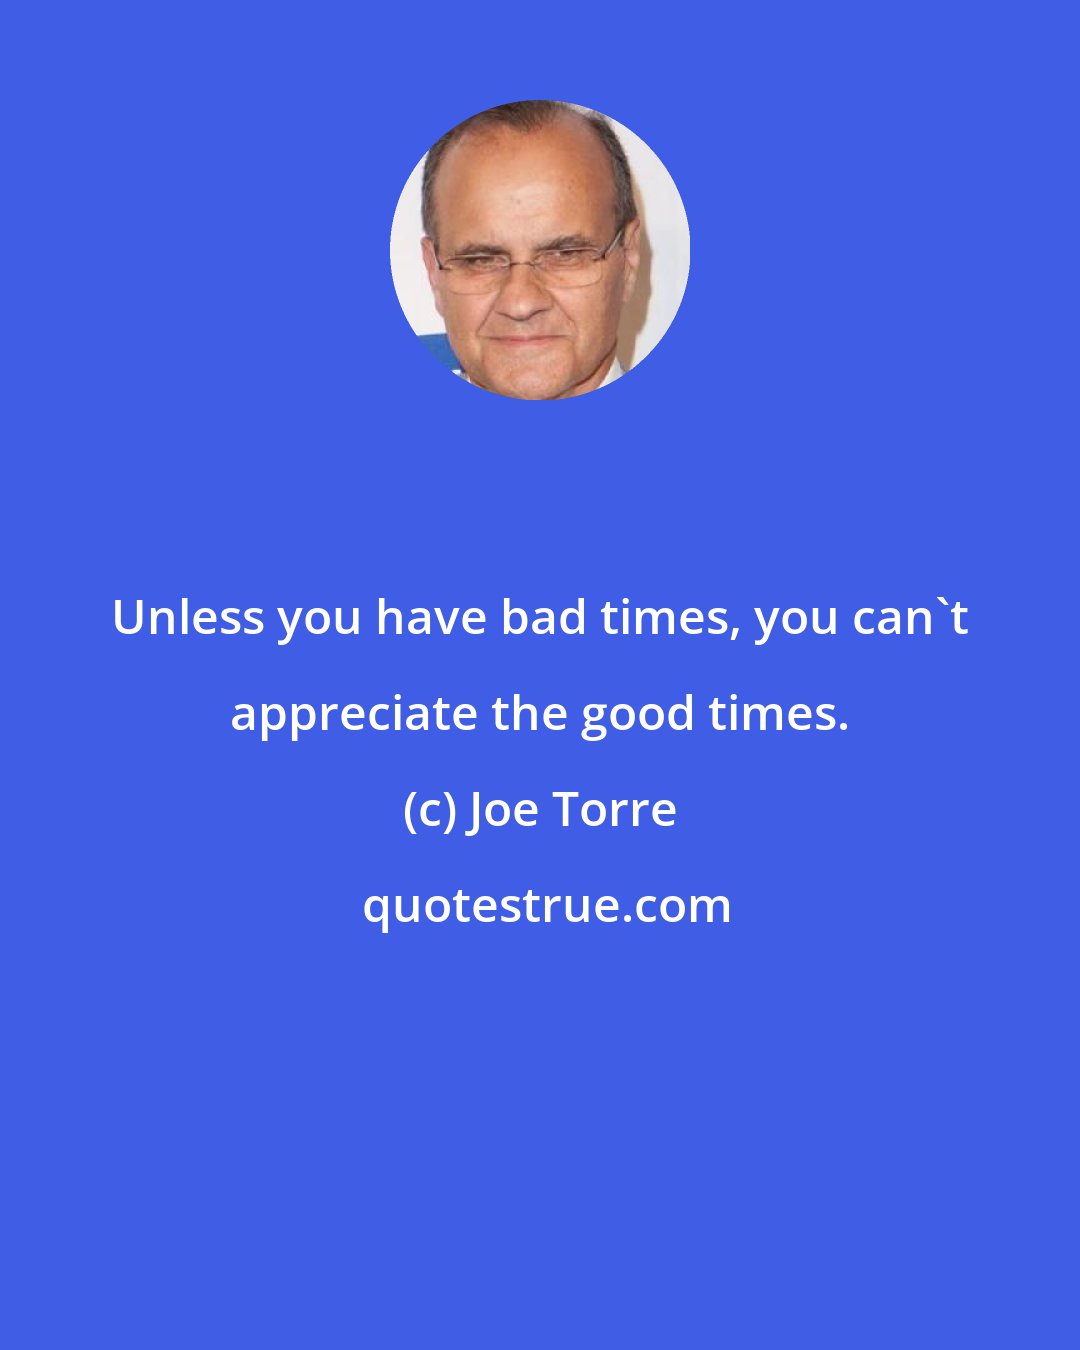 Joe Torre: Unless you have bad times, you can't appreciate the good times.